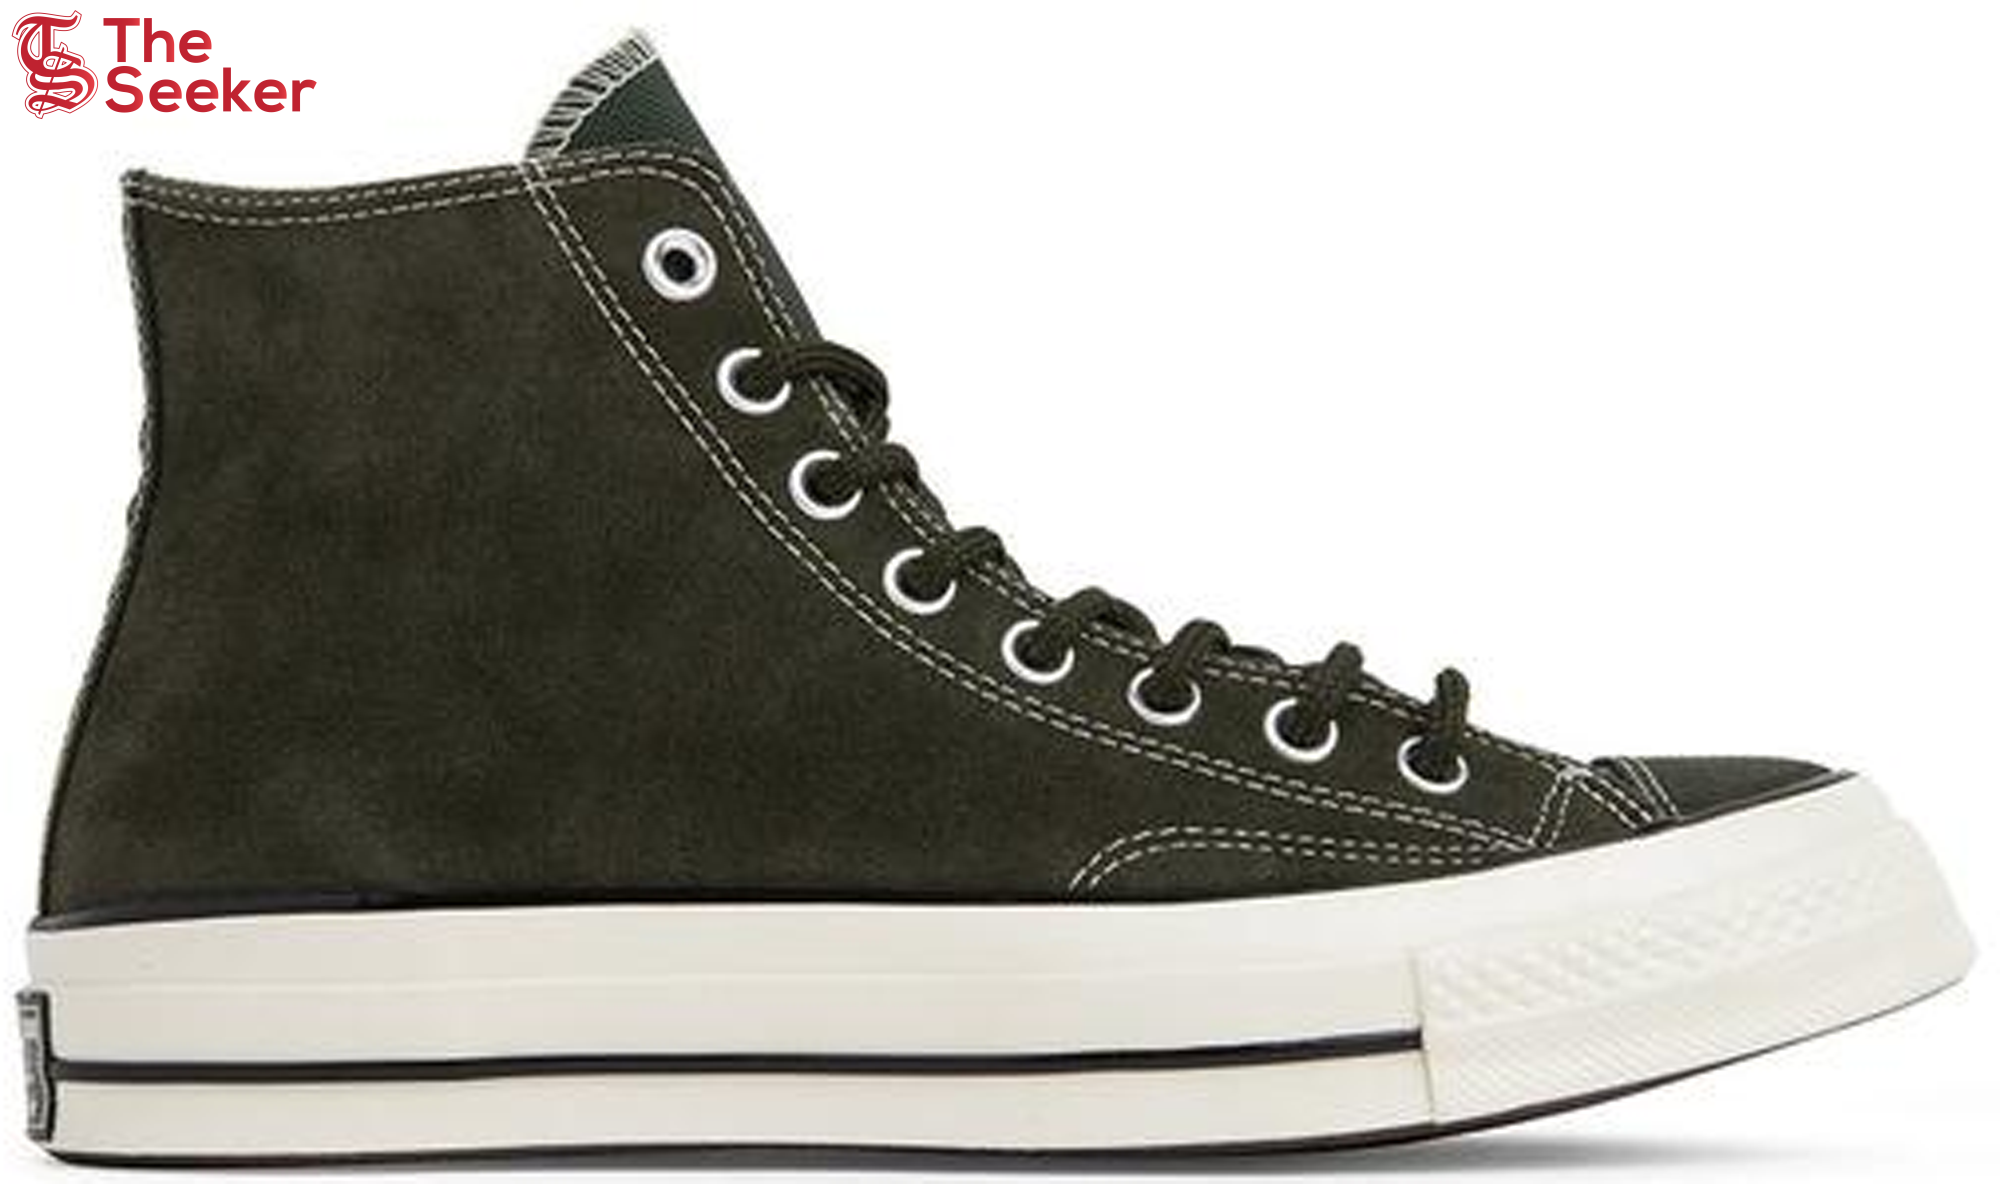 Converse Chuck Taylor All Star 70 Hi Suede Pack Utility Green